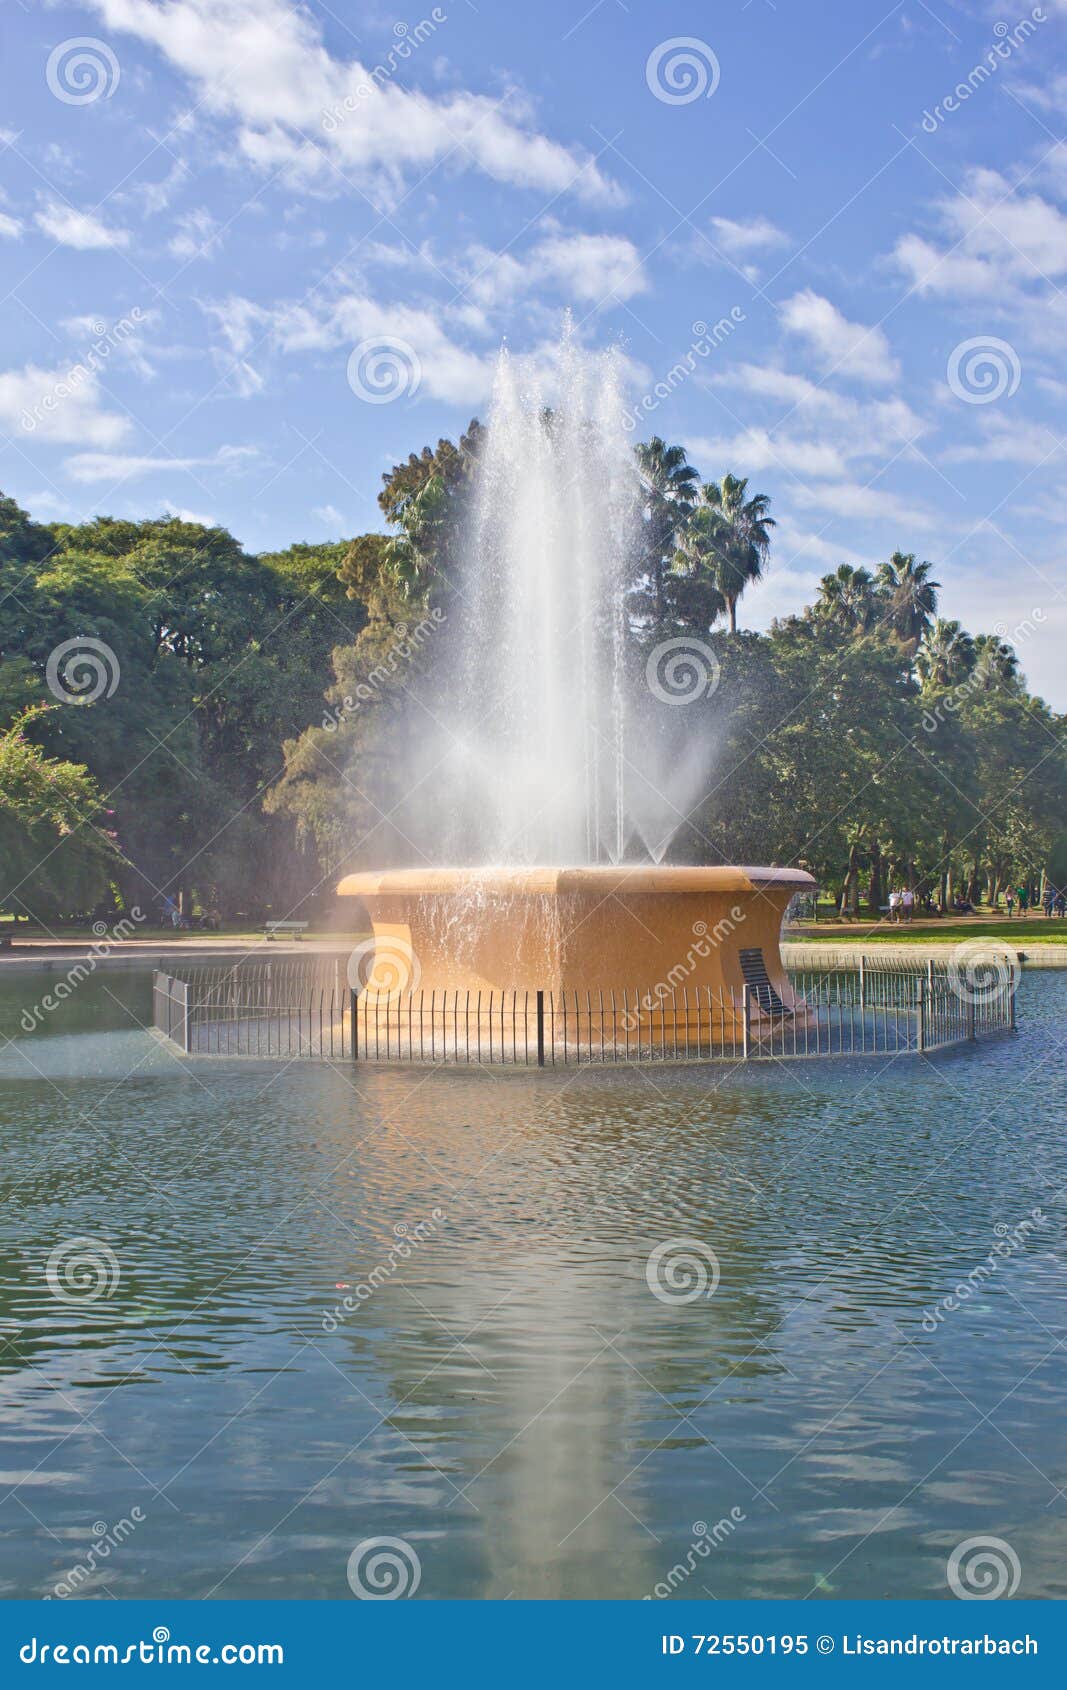 fountain at redencao park